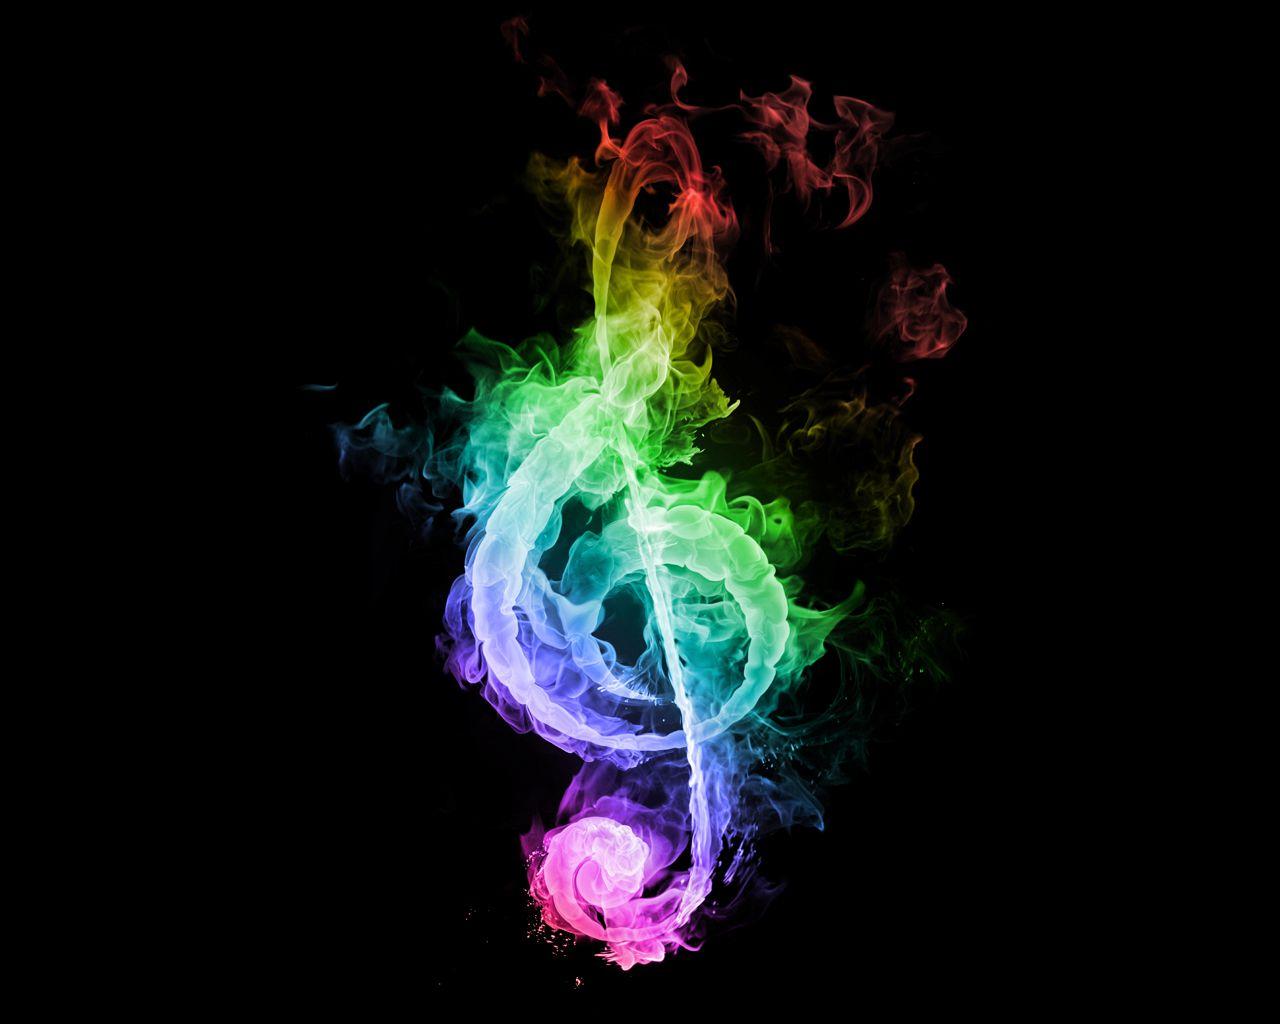 Best image about music notes. Music notes, Music